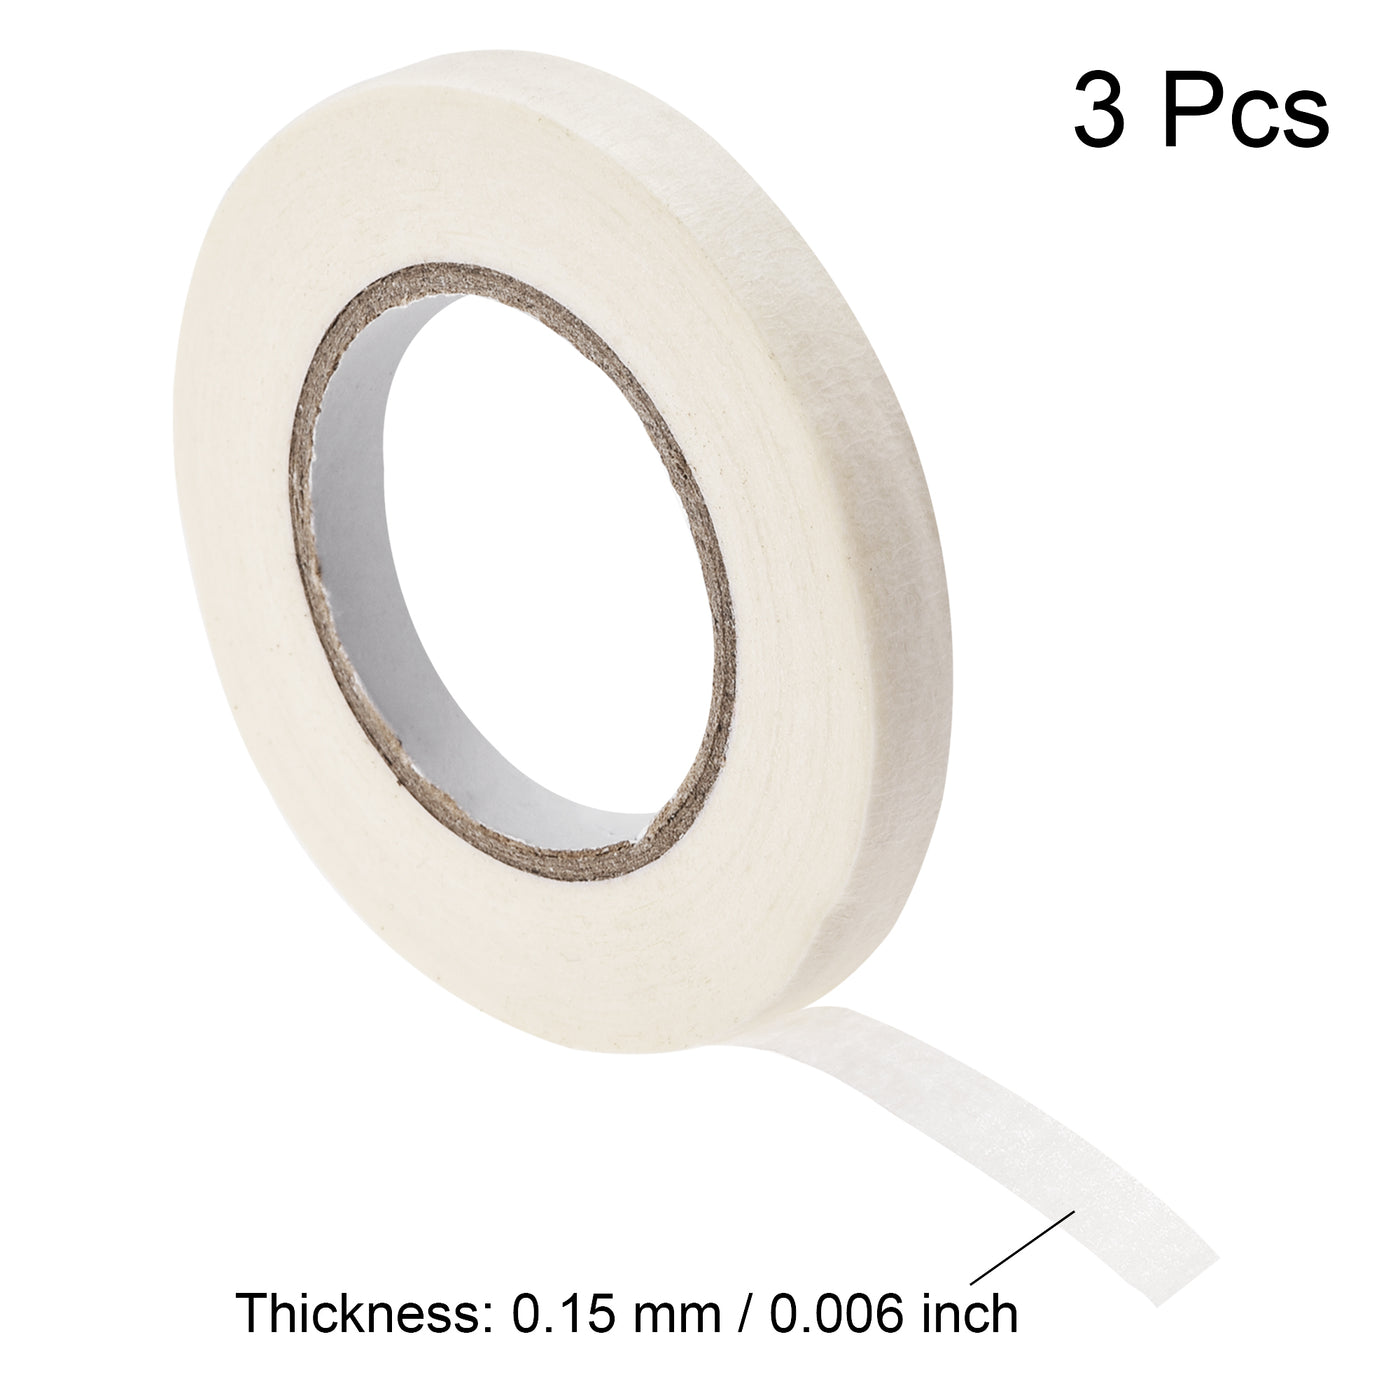 uxcell Uxcell 3Pcs 10mm 0.4 inch Wide 20m 21 Yards Masking Tape Painters Tape Rolls White